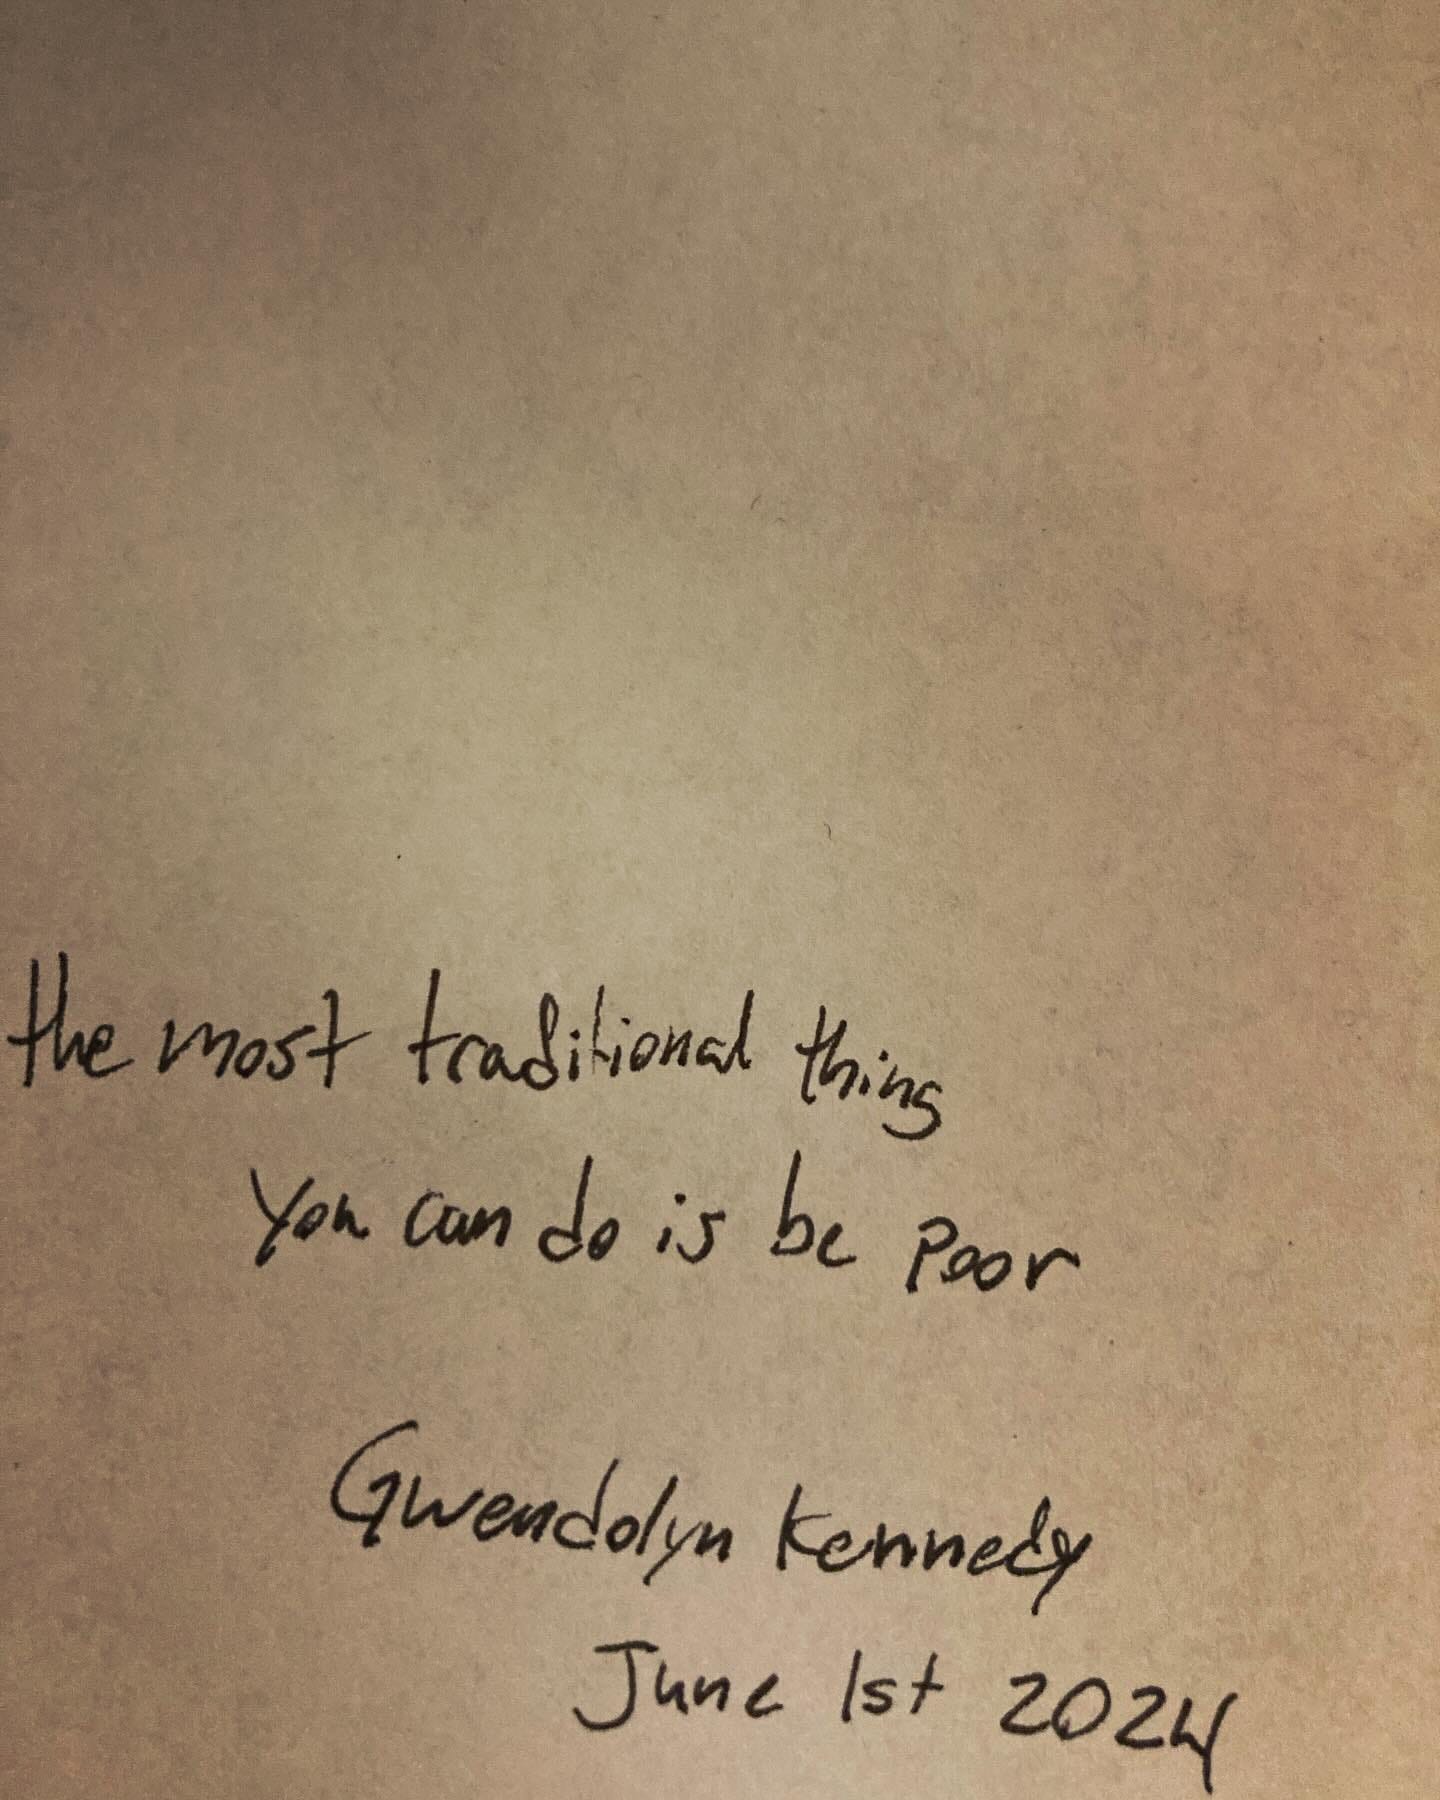 May be an image of text that says 'most trasiliona thing You can do is be poor Gwendolyn kennedy June Ist 2024'